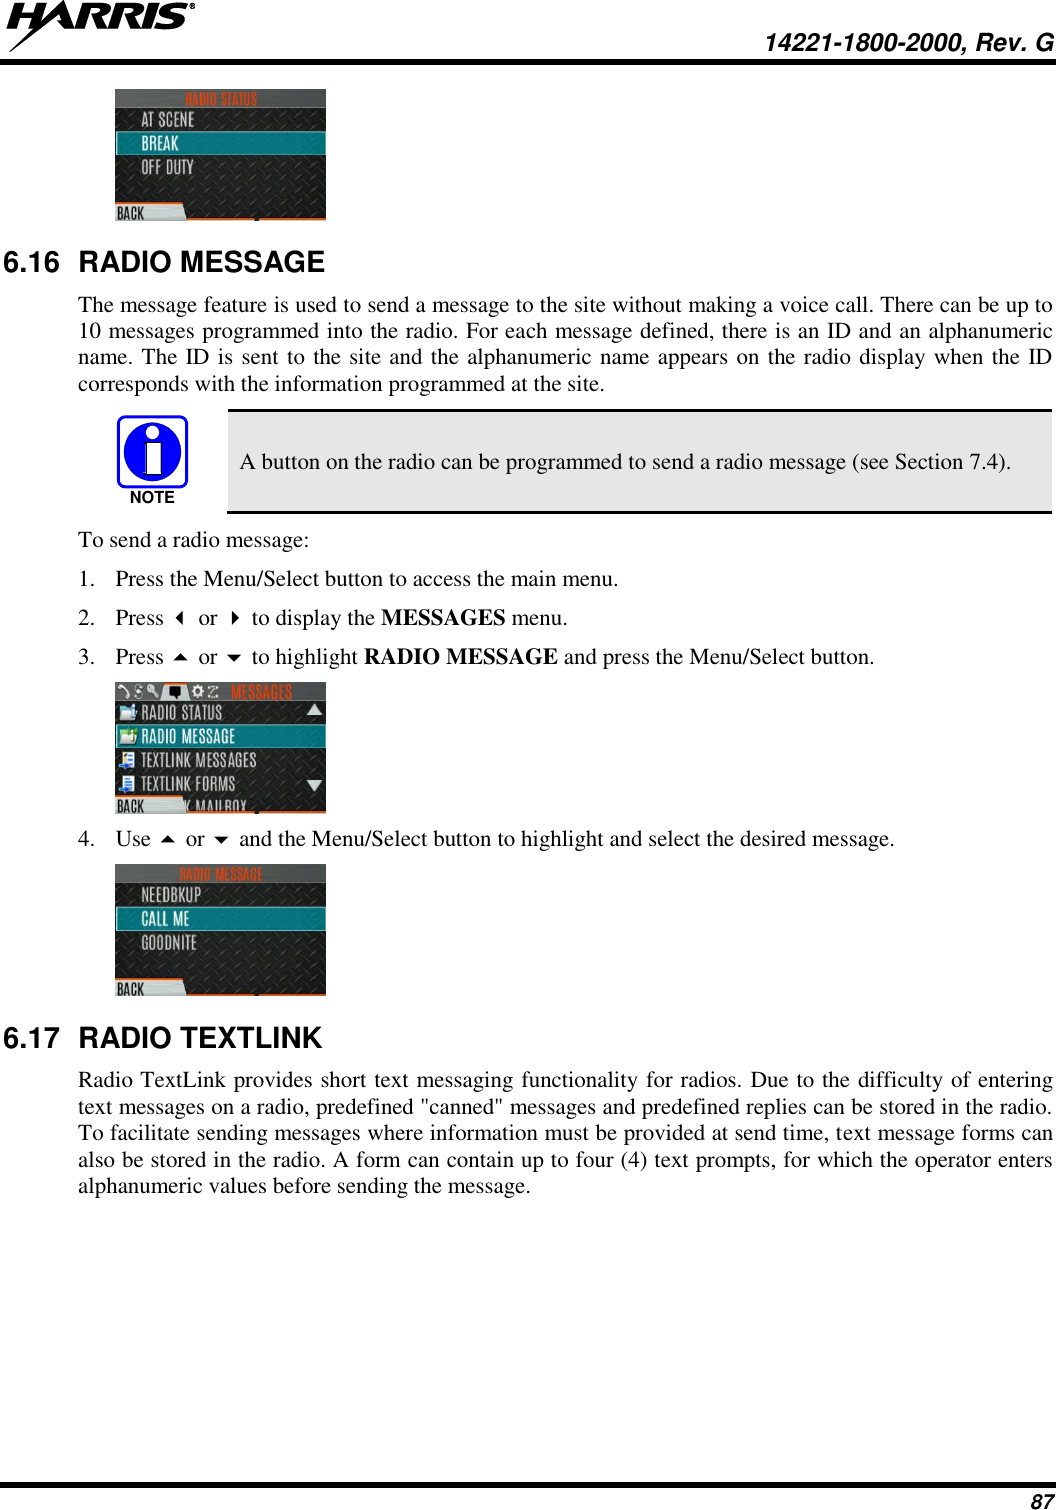   14221-1800-2000, Rev. G 87  6.16  RADIO MESSAGE The message feature is used to send a message to the site without making a voice call. There can be up to 10 messages programmed into the radio. For each message defined, there is an ID and an alphanumeric name. The ID is sent to the site and the alphanumeric name appears on the radio display when the ID corresponds with the information programmed at the site.  A button on the radio can be programmed to send a radio message (see Section 7.4). To send a radio message: 1. Press the Menu/Select button to access the main menu. 2. Press  or  to display the MESSAGES menu. 3. Press  or  to highlight RADIO MESSAGE and press the Menu/Select button.  4. Use  or  and the Menu/Select button to highlight and select the desired message.   6.17  RADIO TEXTLINK Radio TextLink provides short text messaging functionality for radios. Due to the difficulty of entering text messages on a radio, predefined &quot;canned&quot; messages and predefined replies can be stored in the radio. To facilitate sending messages where information must be provided at send time, text message forms can also be stored in the radio. A form can contain up to four (4) text prompts, for which the operator enters alphanumeric values before sending the message. NOTE